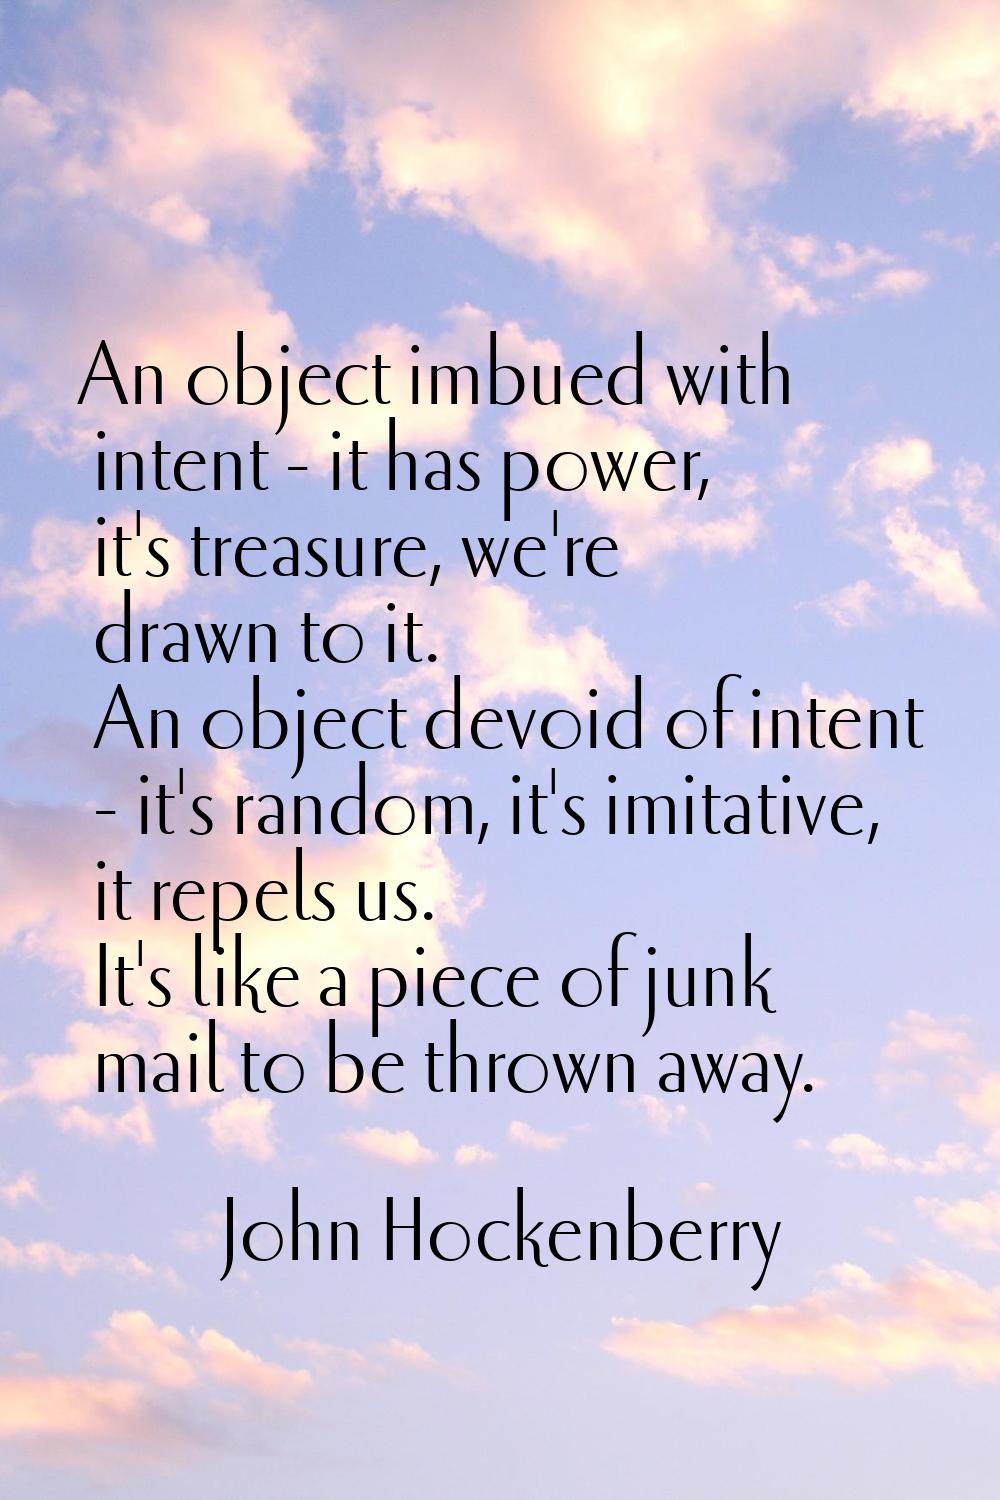 An object imbued with intent - it has power, it's treasure, we're drawn to it. An object devoid of 